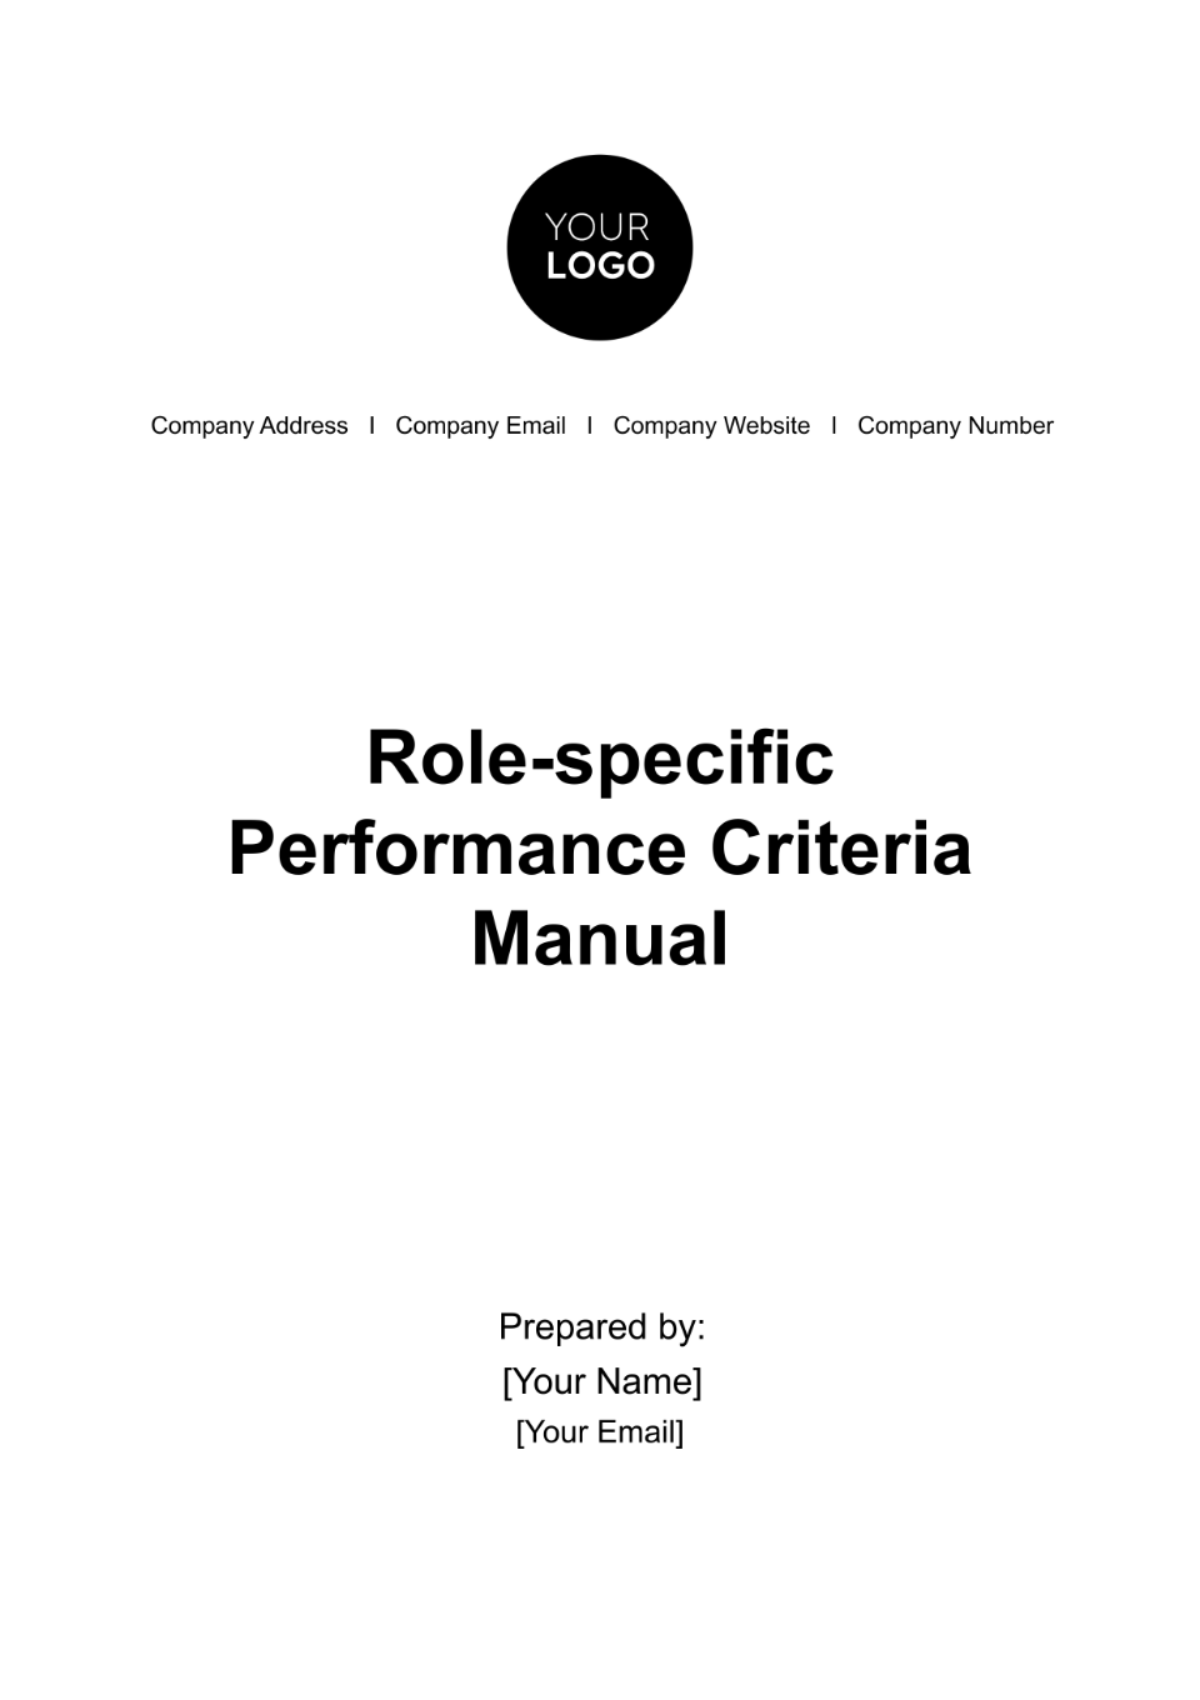 Free Role-specific Performance Criteria Manual HR Template